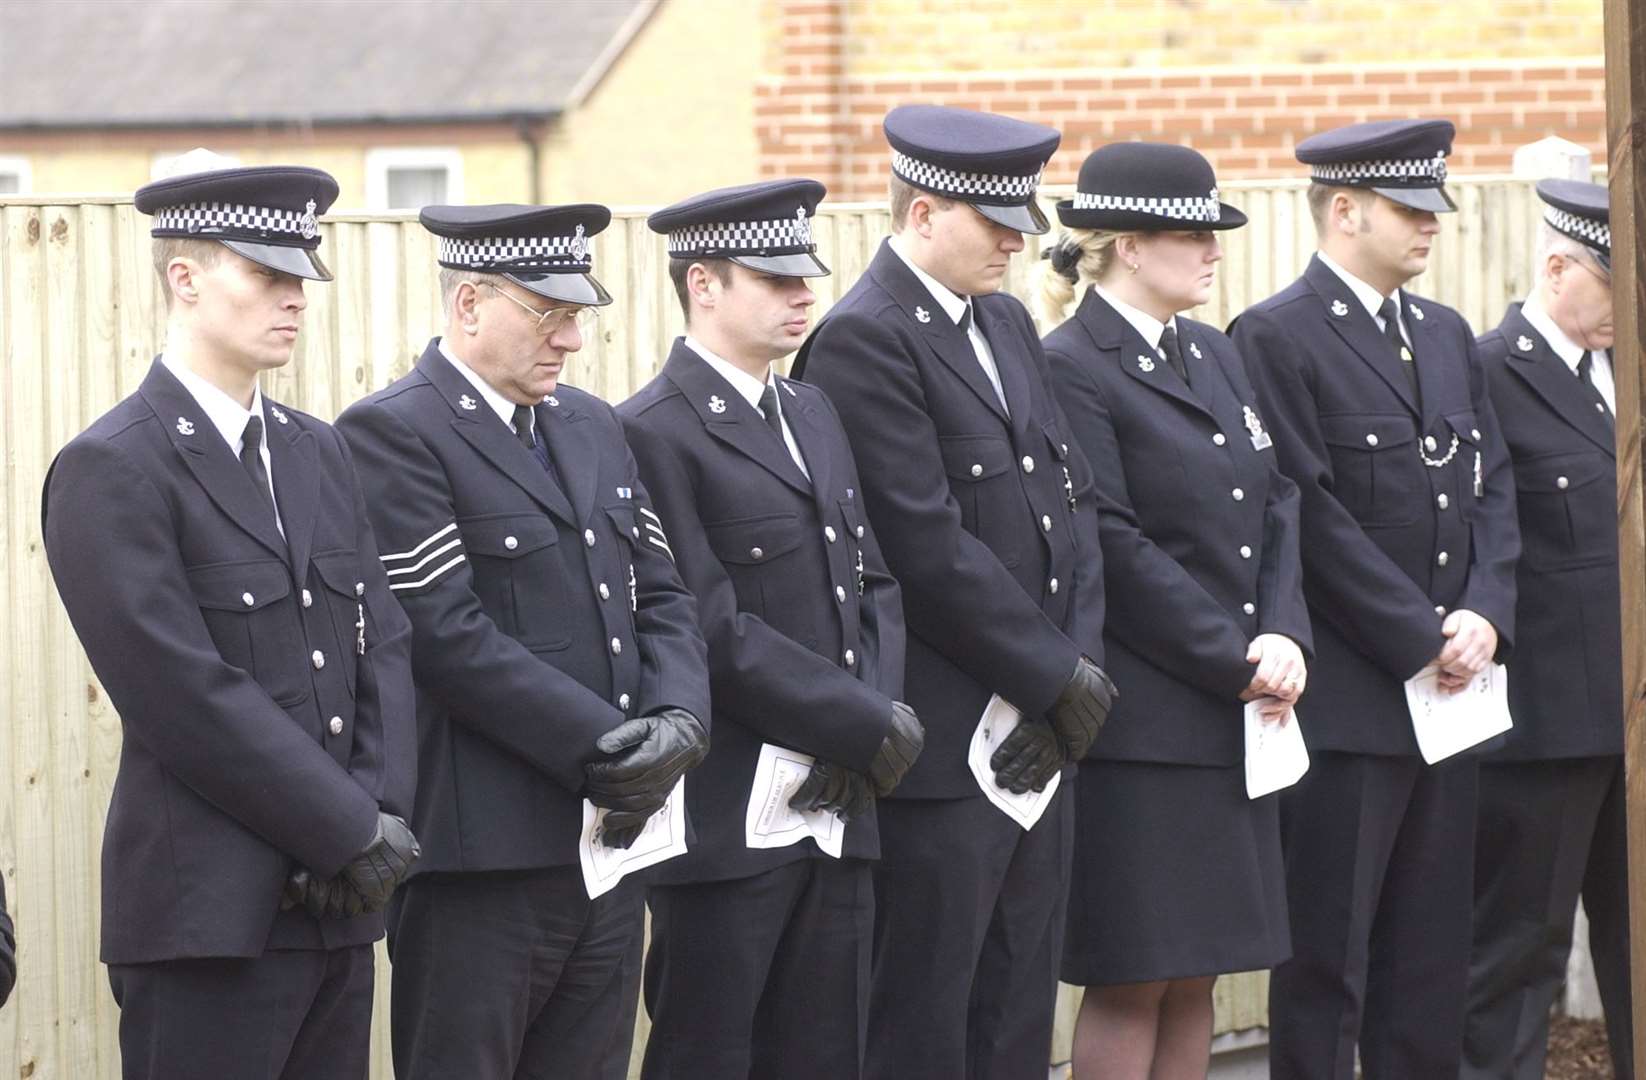 Officers at the official opening of a memorial garden for PC Jon Odell in 2001